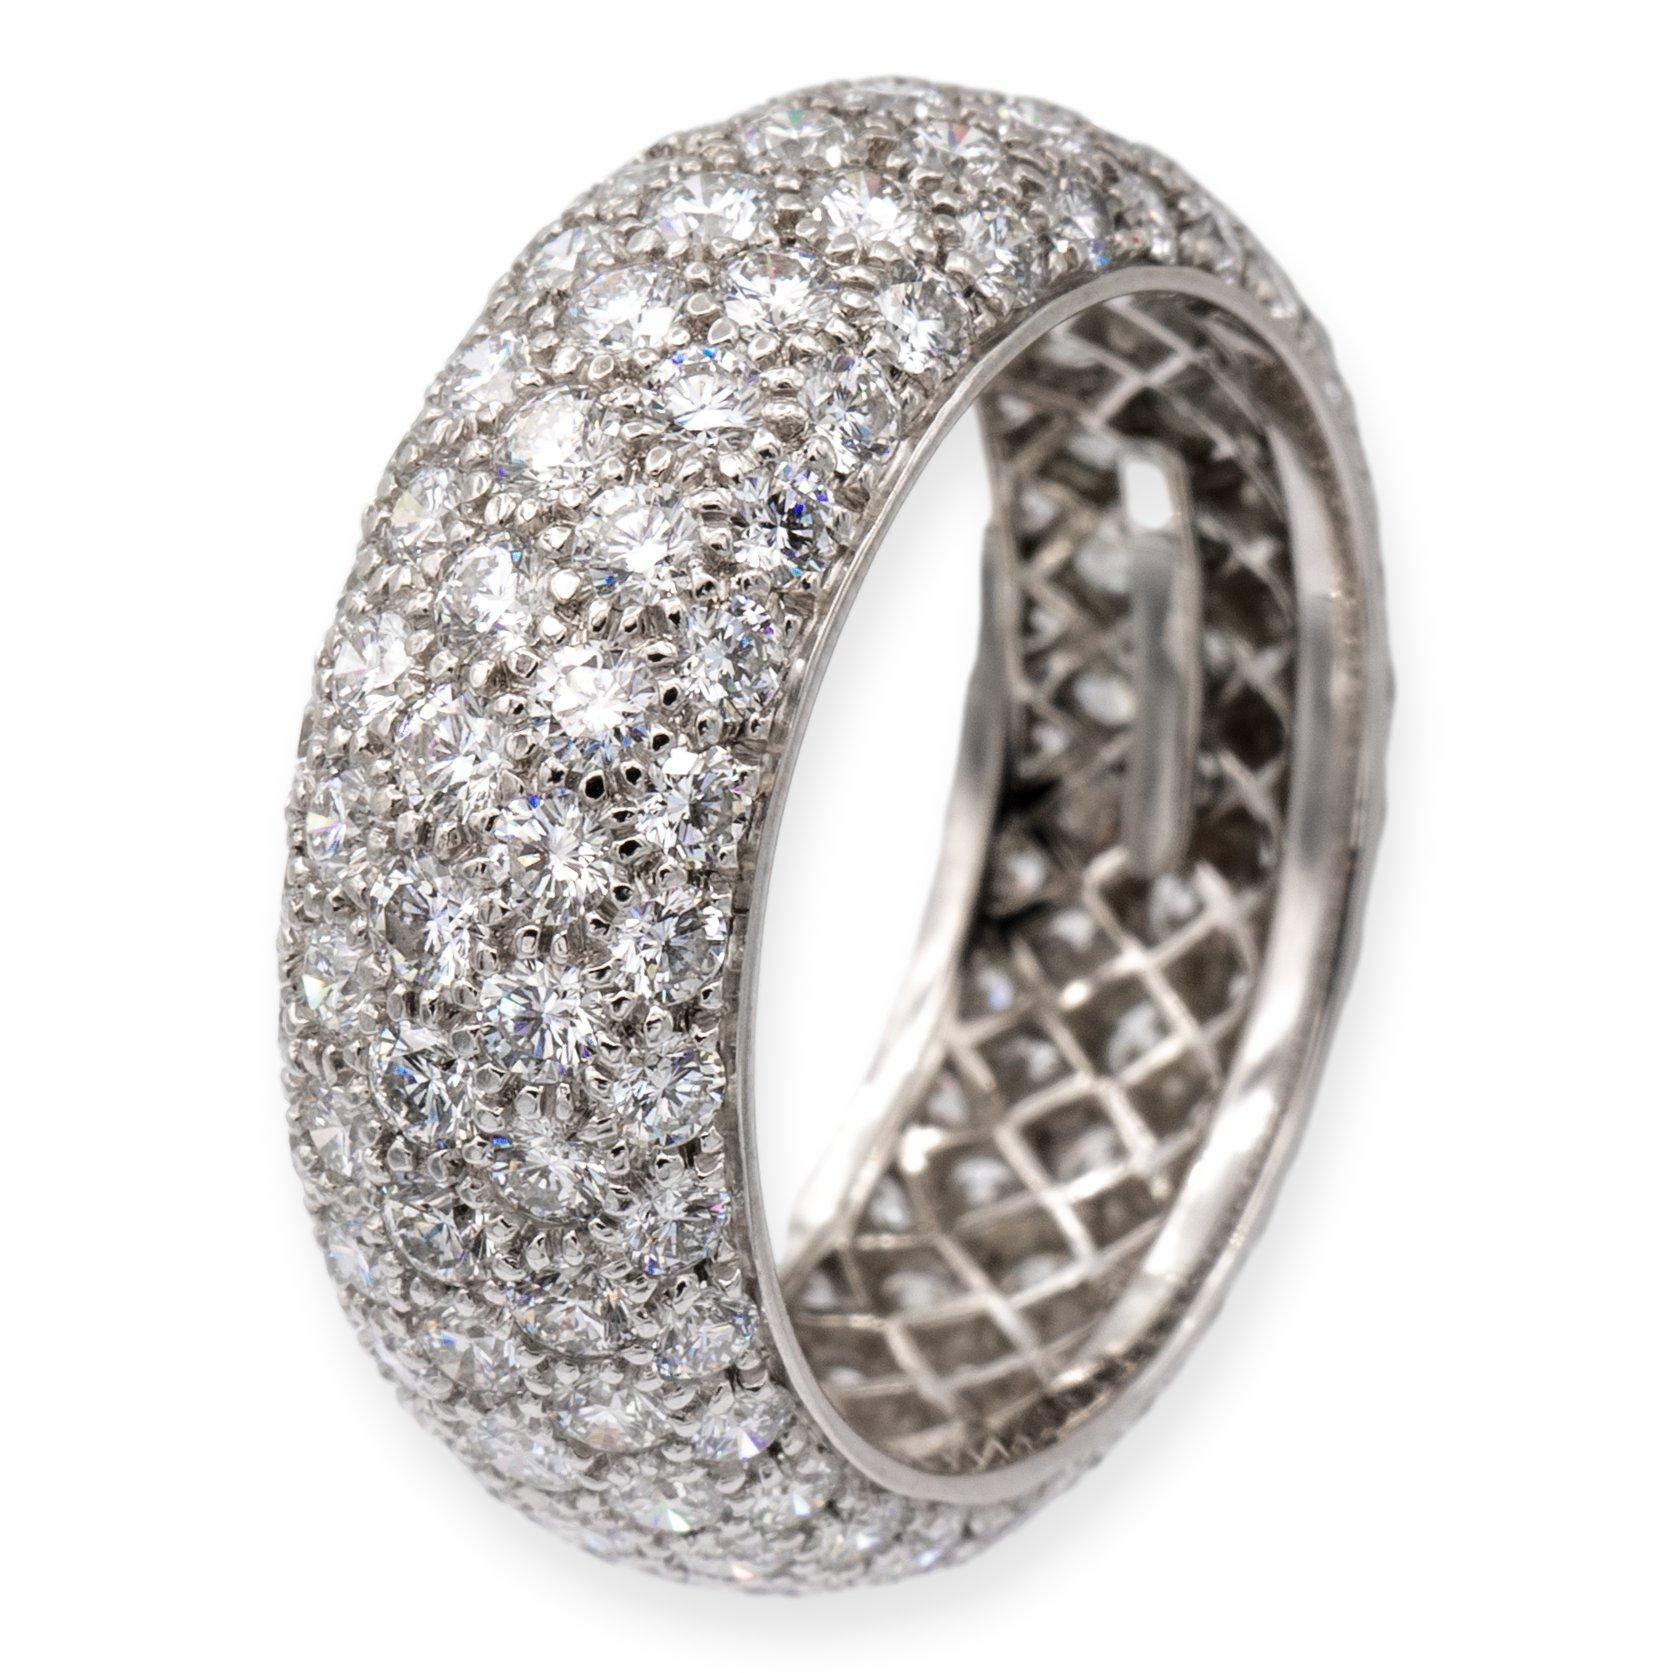 Tiffany & Co. 5 row pave band ring from the Etoile collection finely crafted in platinum with 150 round brilliant cut diamonds bead set all the way around weighing 3.75 carats total weight, F-G color , VVS-VS clarity. The band has a domed design